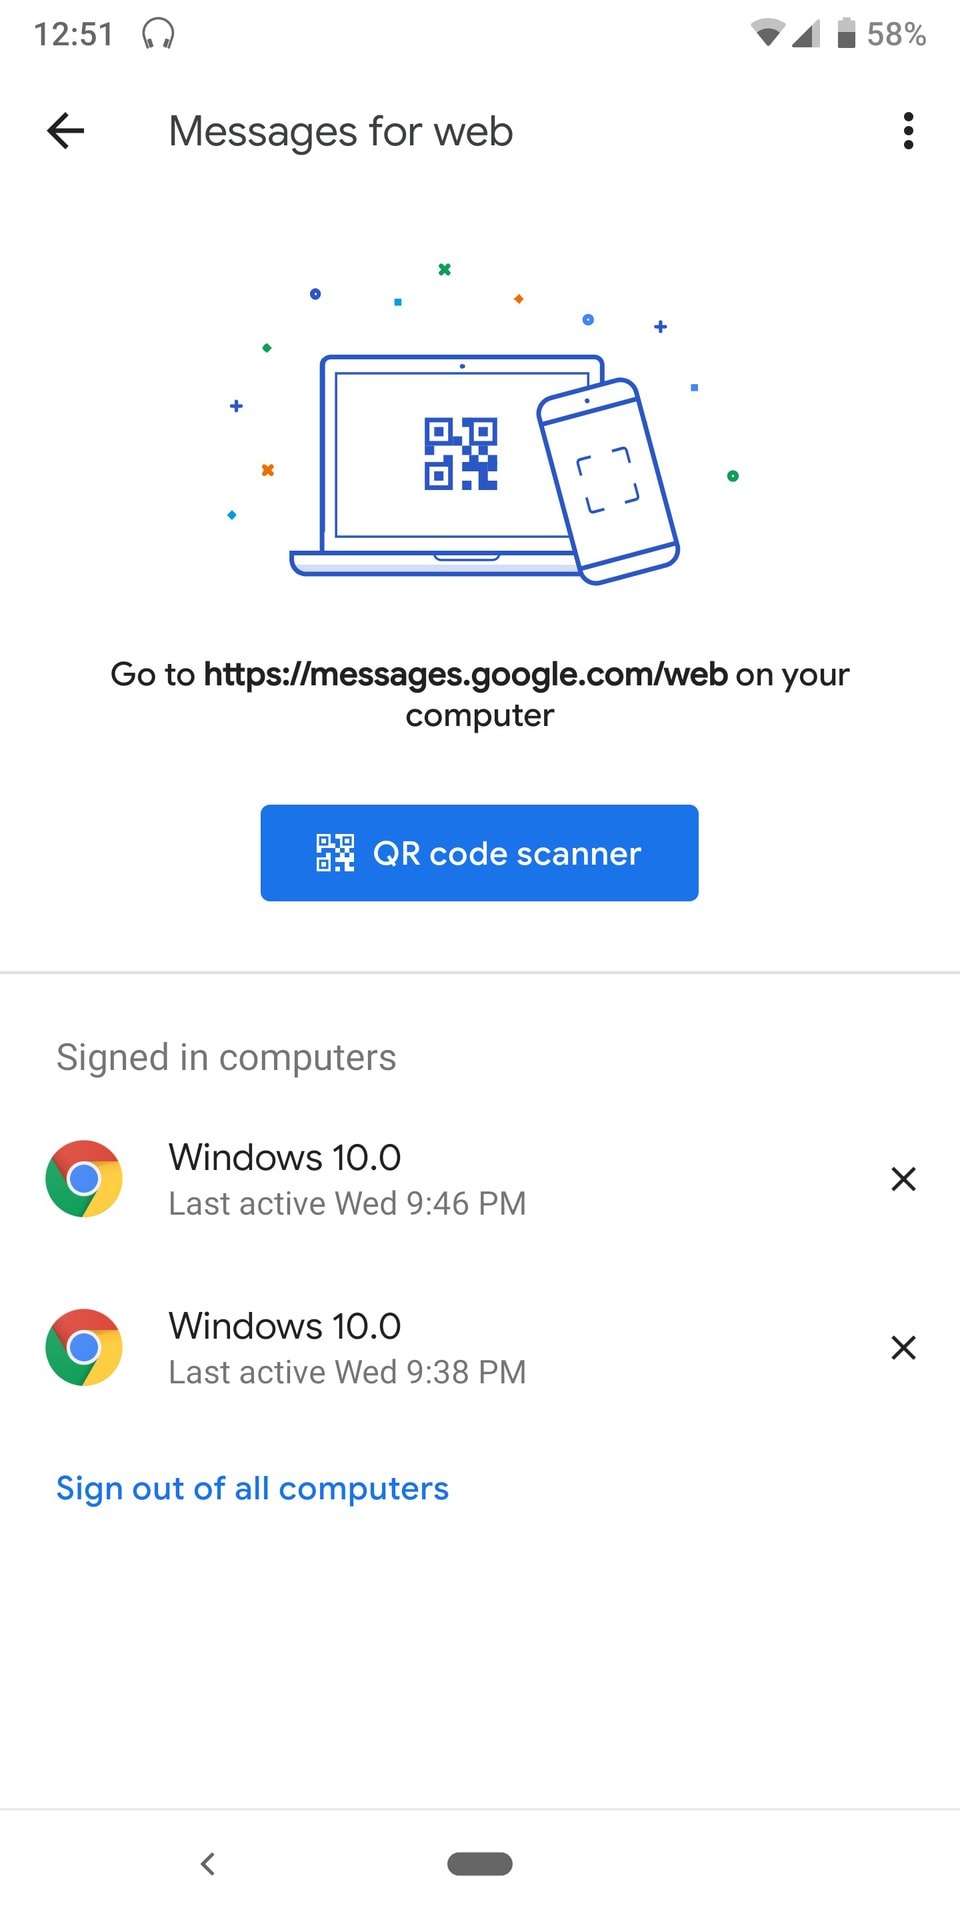 messages for web access instructions